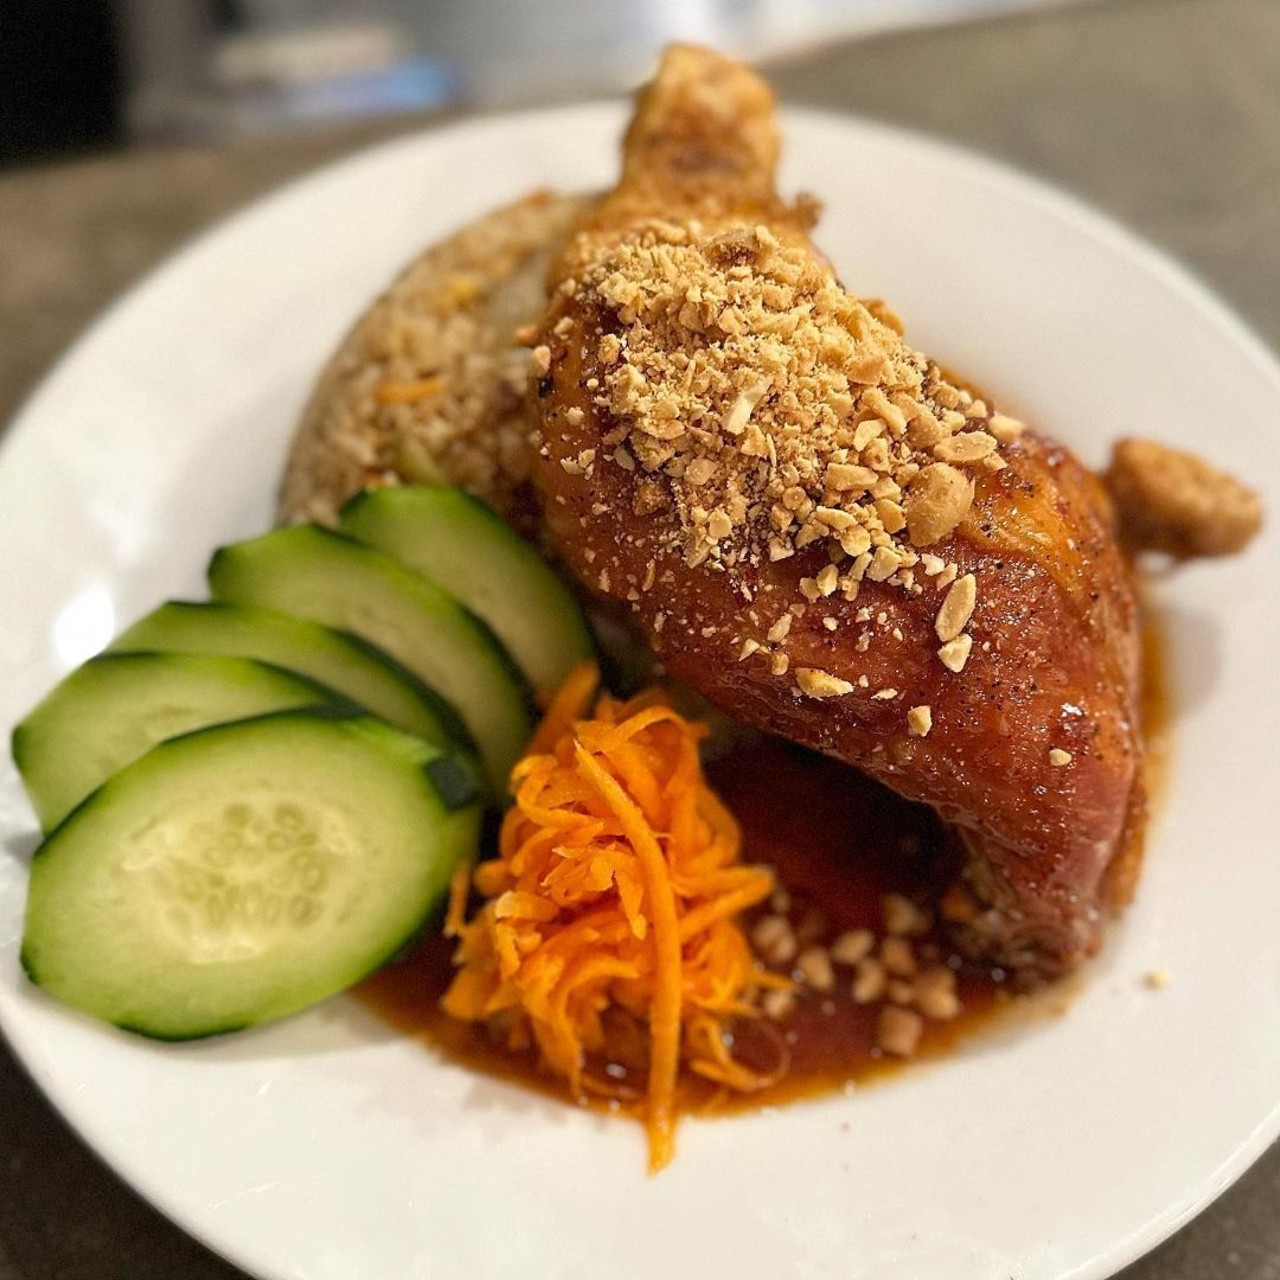 Eatz Vietnamese Restaurant 
2244 Frankfort Ave. 
One of LEO&#146;s favorite lunch spots. Open for dinner also, Eatz is great for fans of ph?. Eatz is also a popular food truck by the same folks. Photo via Eatz